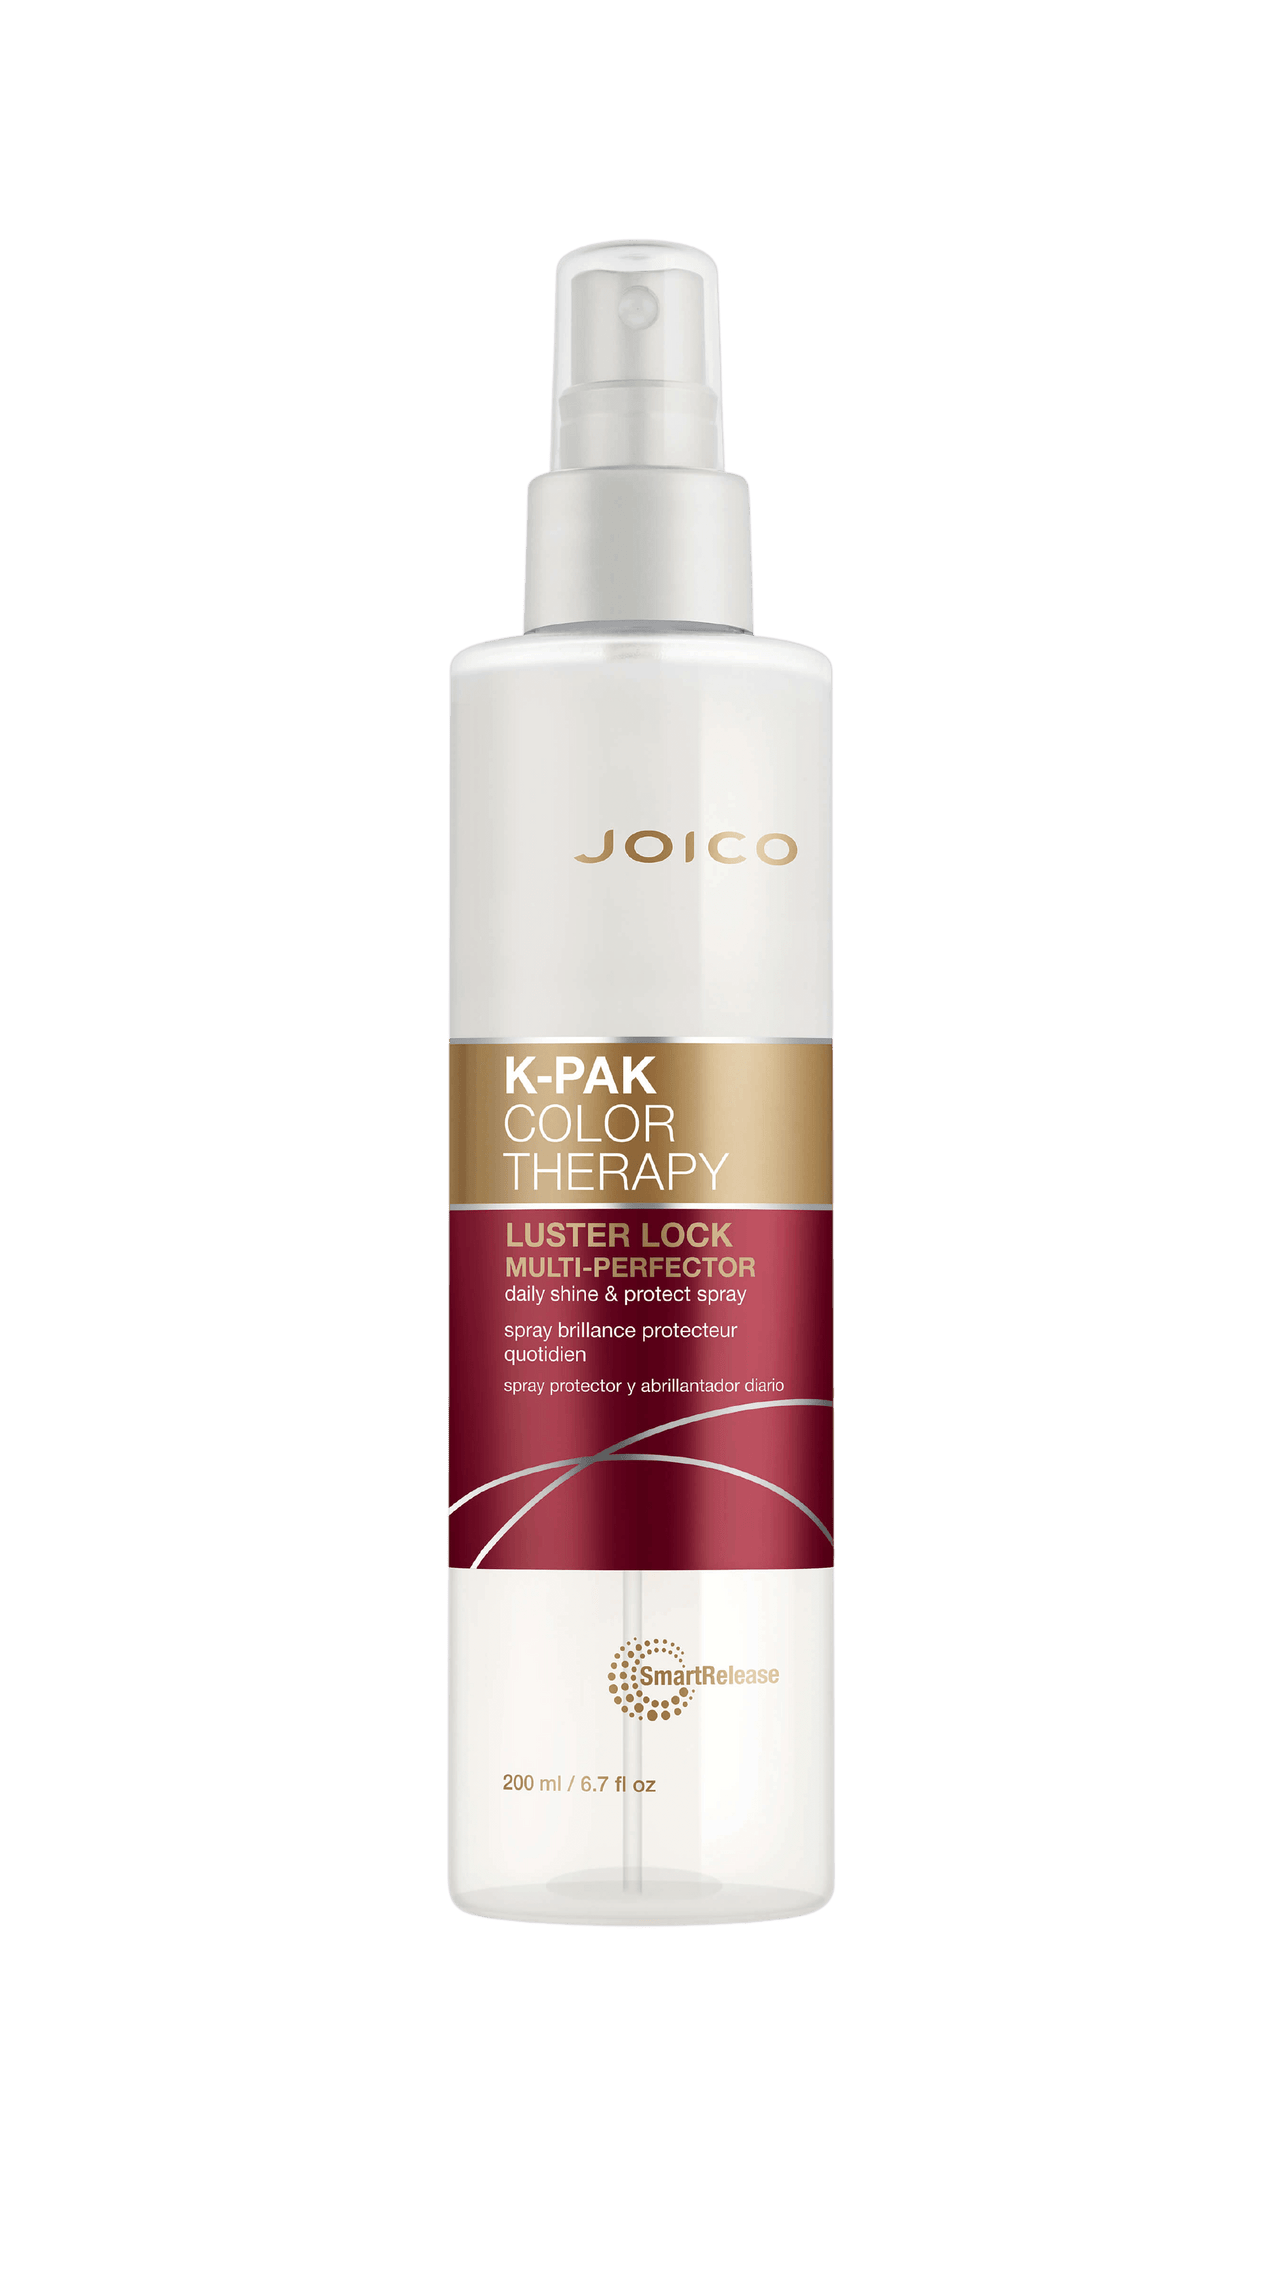 Joico  K-Pak Color Therapy Luster Lock Multi-Perfector 200mL Spray